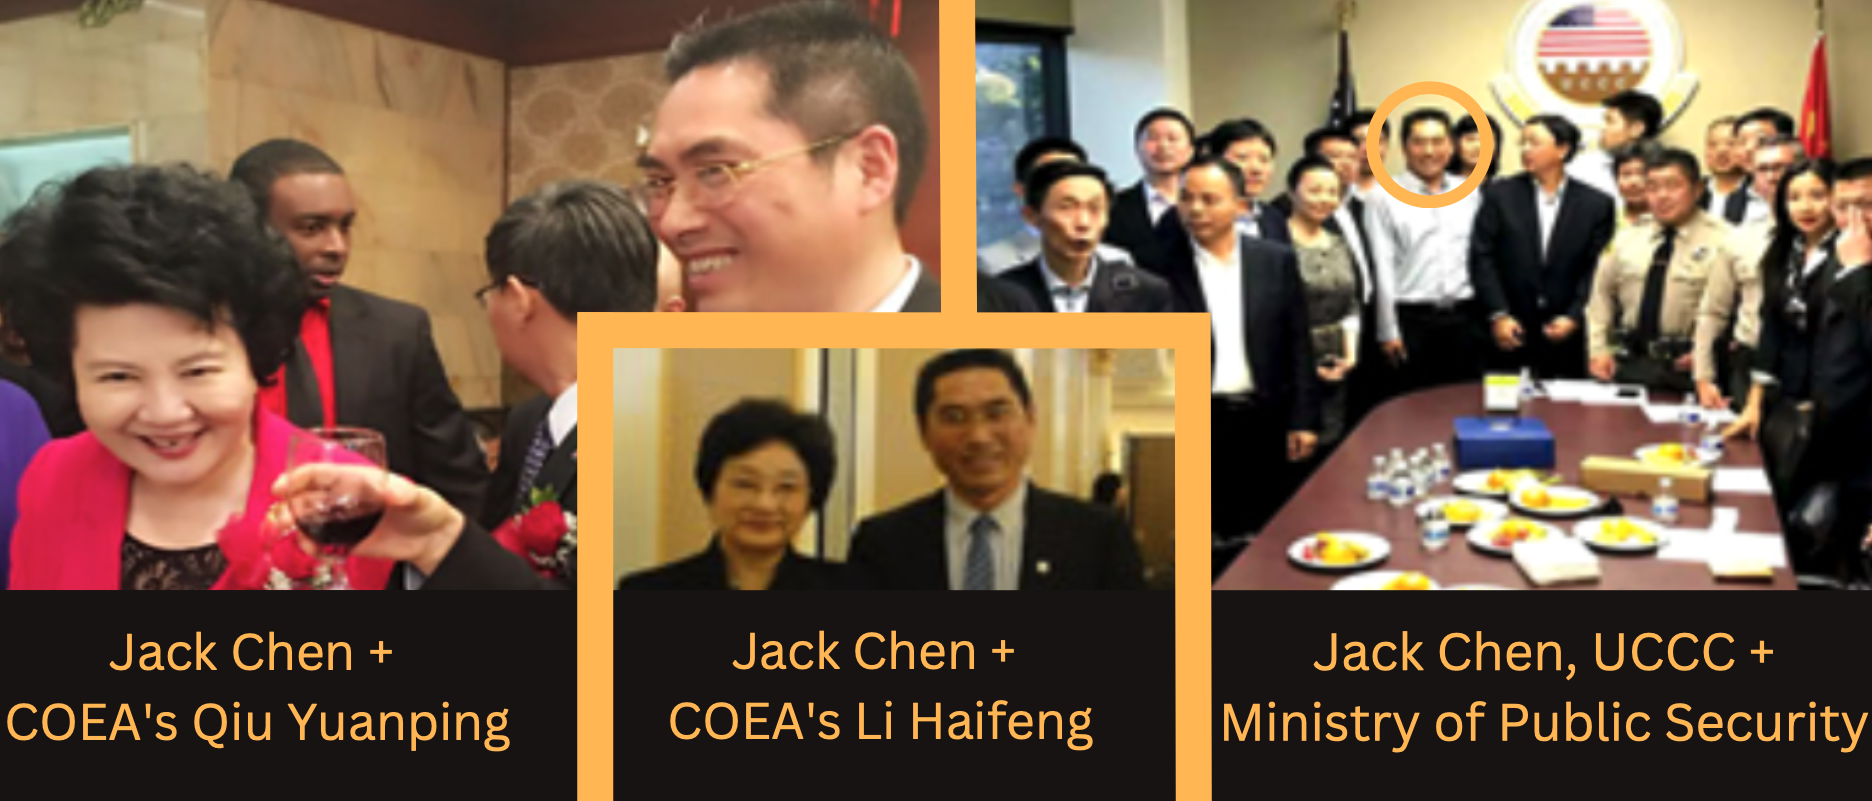 UCCC's head, Jack Chen, whose Chinese name is Chen Jinjie, has met with COEA leaders such as Qiu Yuanping and Li Haifeng, and also welcomed Ministry of Public Security personnel to UCCC's California headquarters. [Image created by the Daily Caller News Foundation using images from the website of U.S.-Chinese General Chamber of Commerce's website]